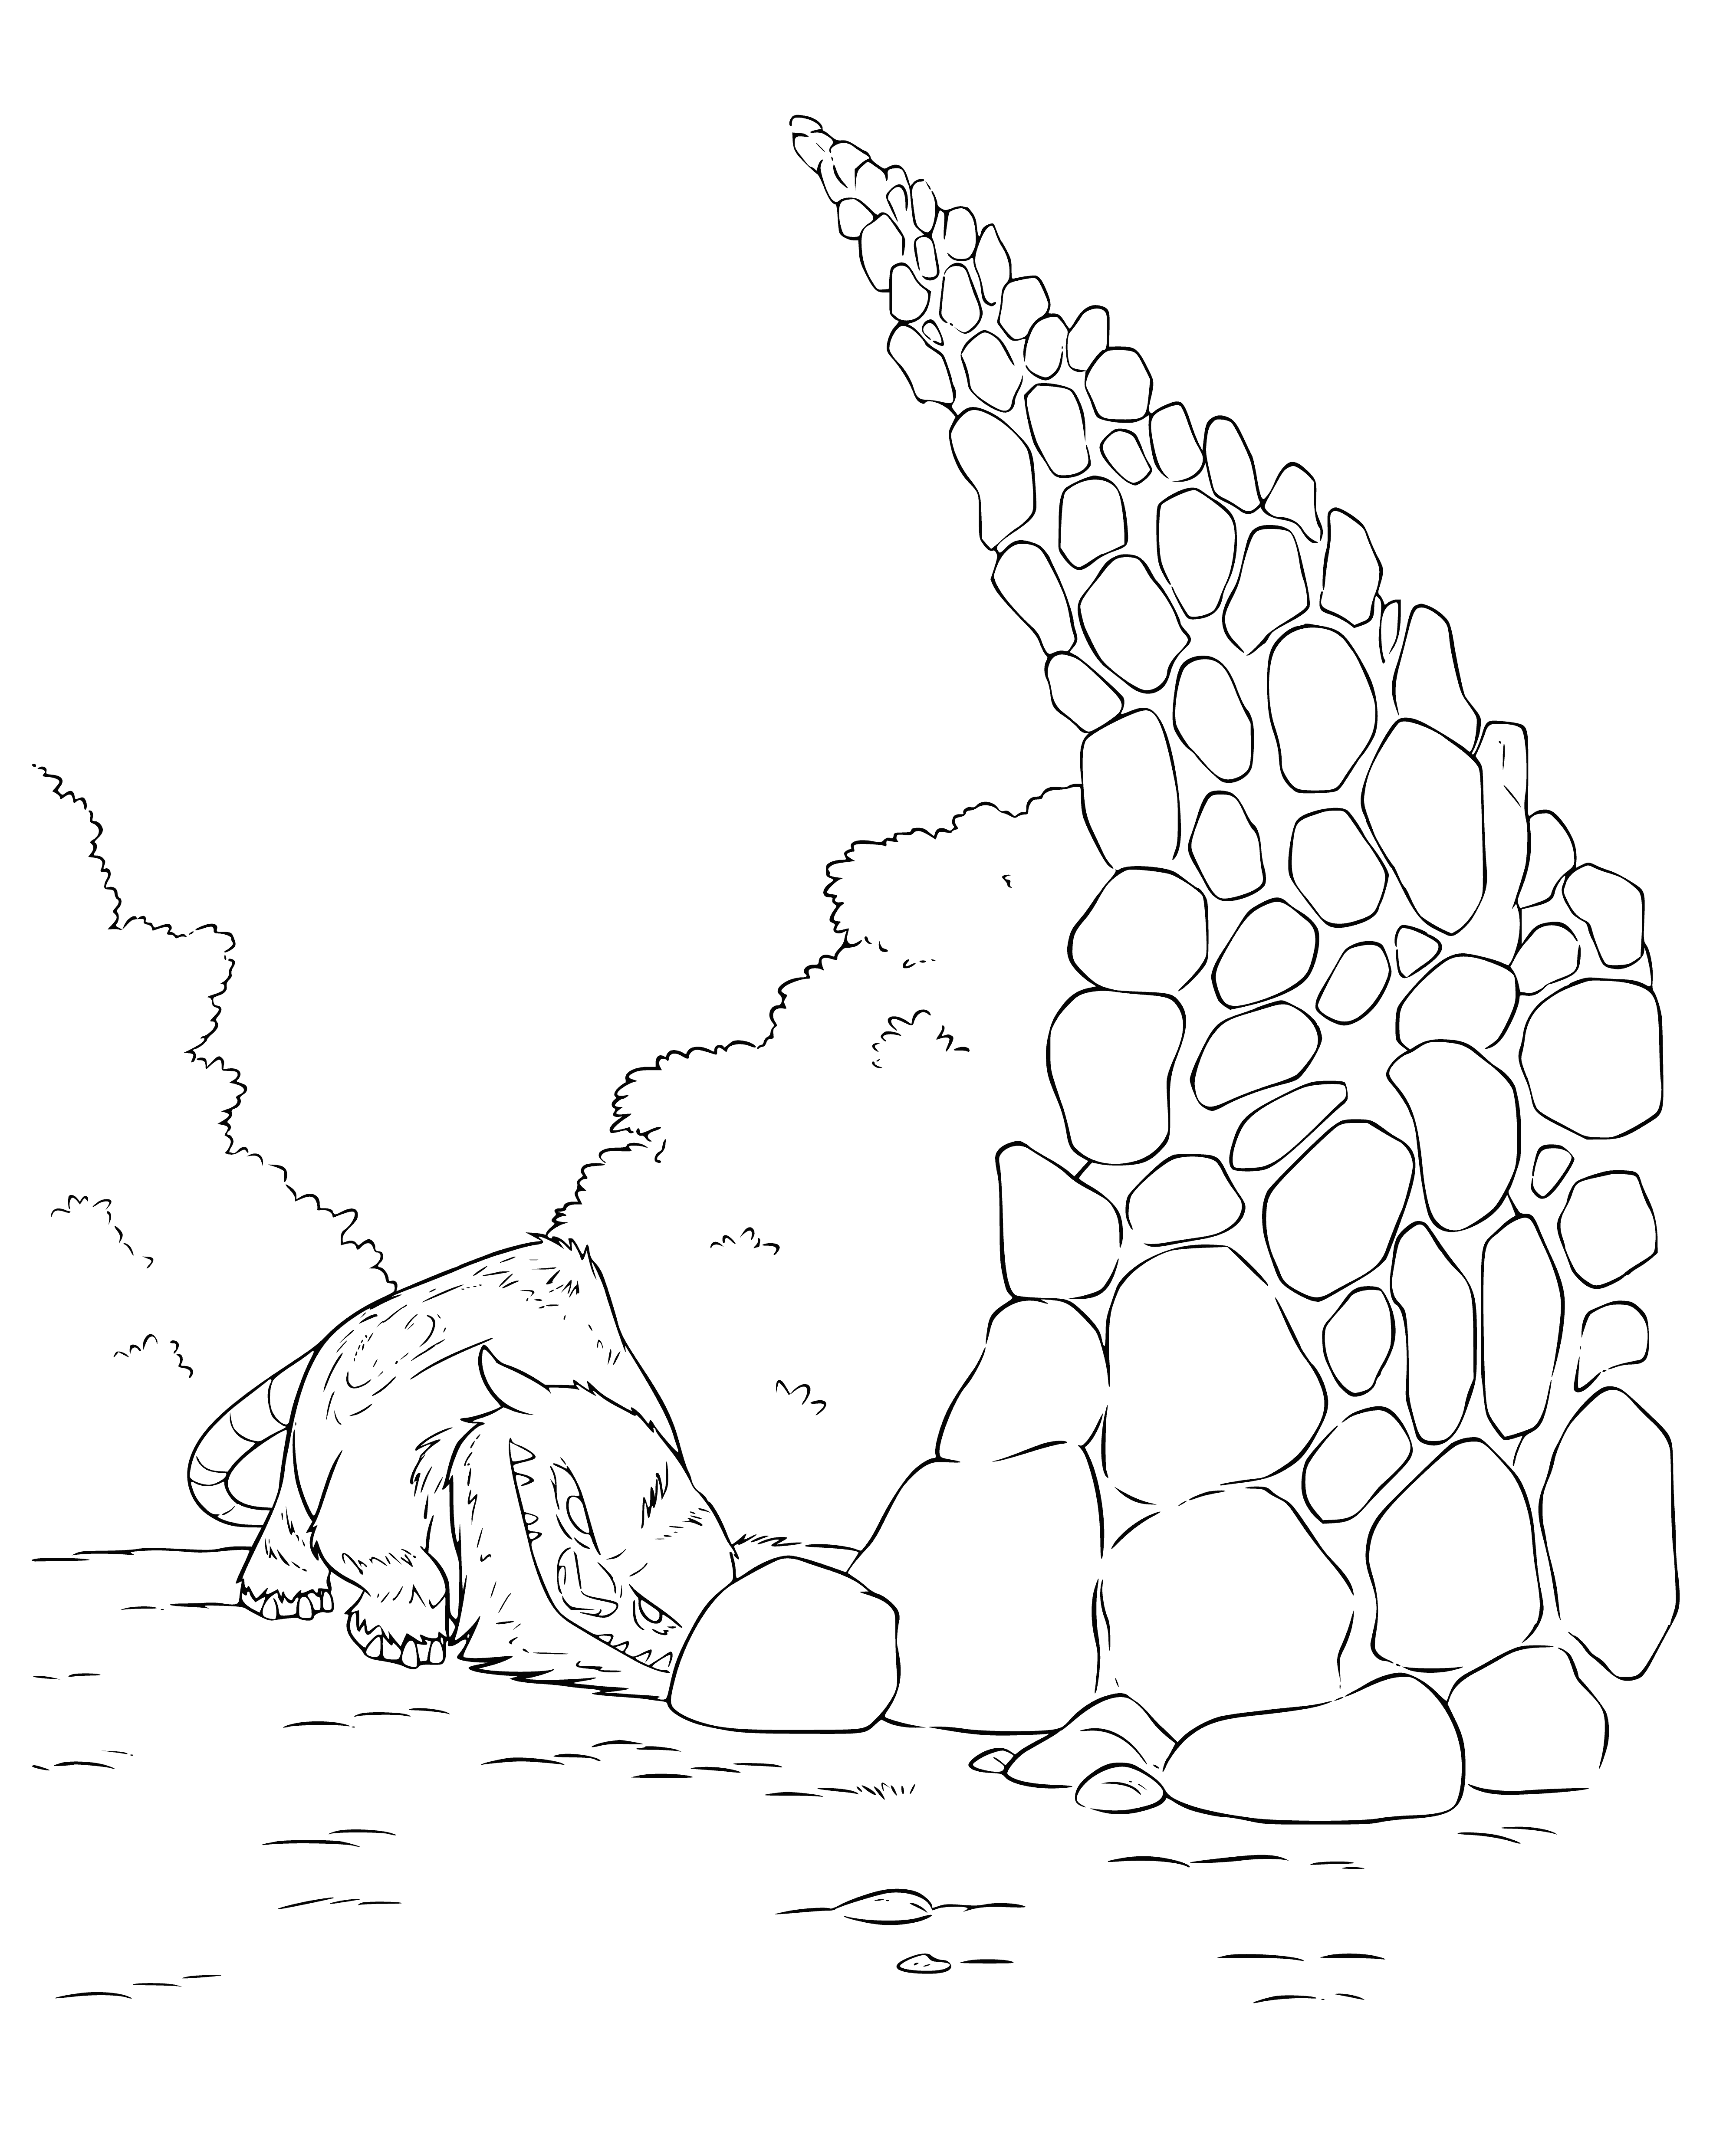 coloring page: Gigantic stone monster rampages through destroyed city, sniffing air & listening for something unknown.